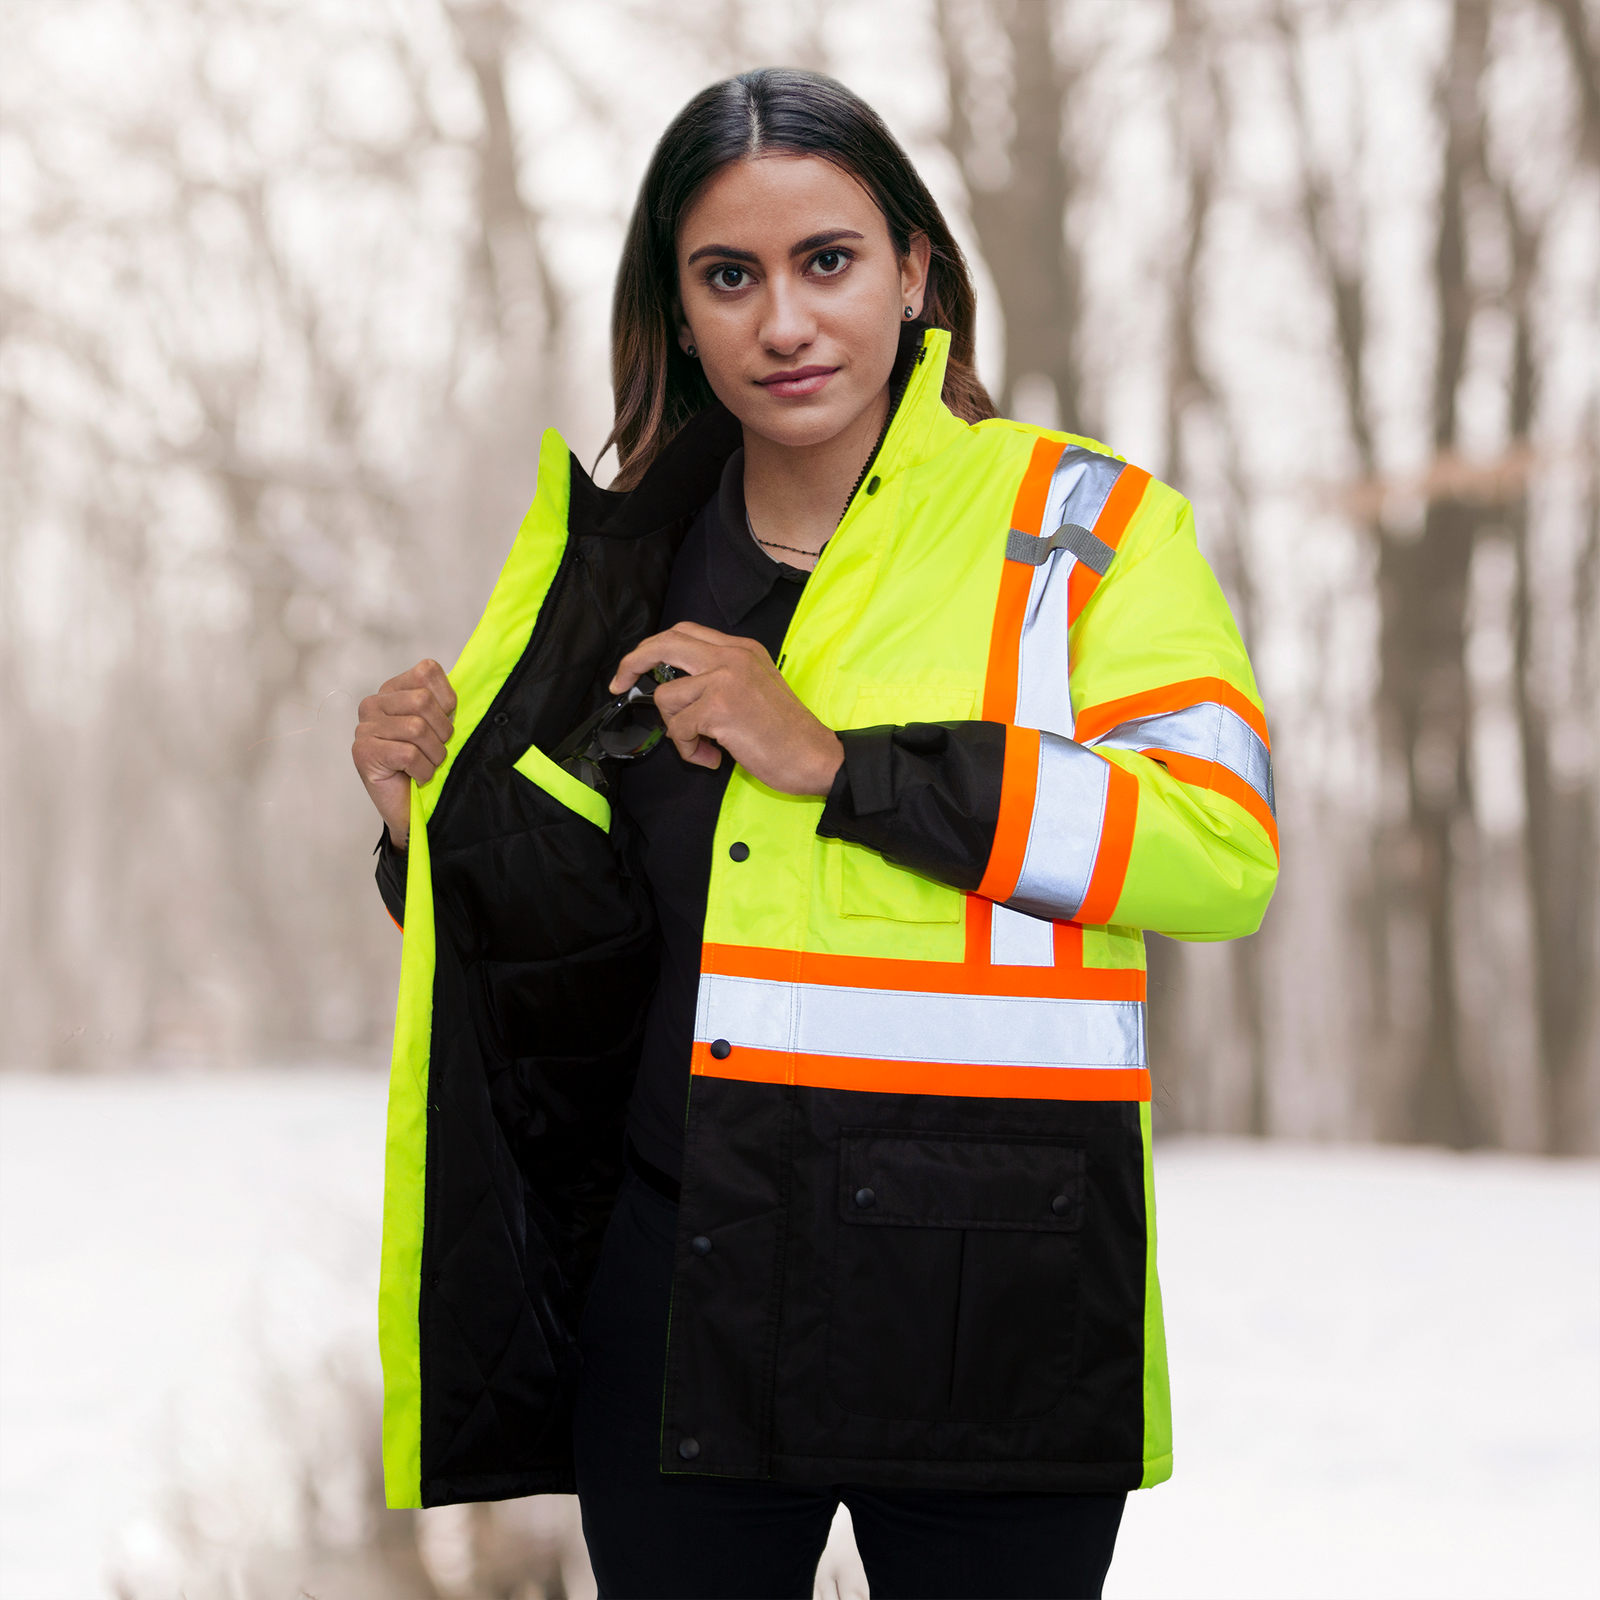 Woman wearing the lime yellow jacket for winter protection